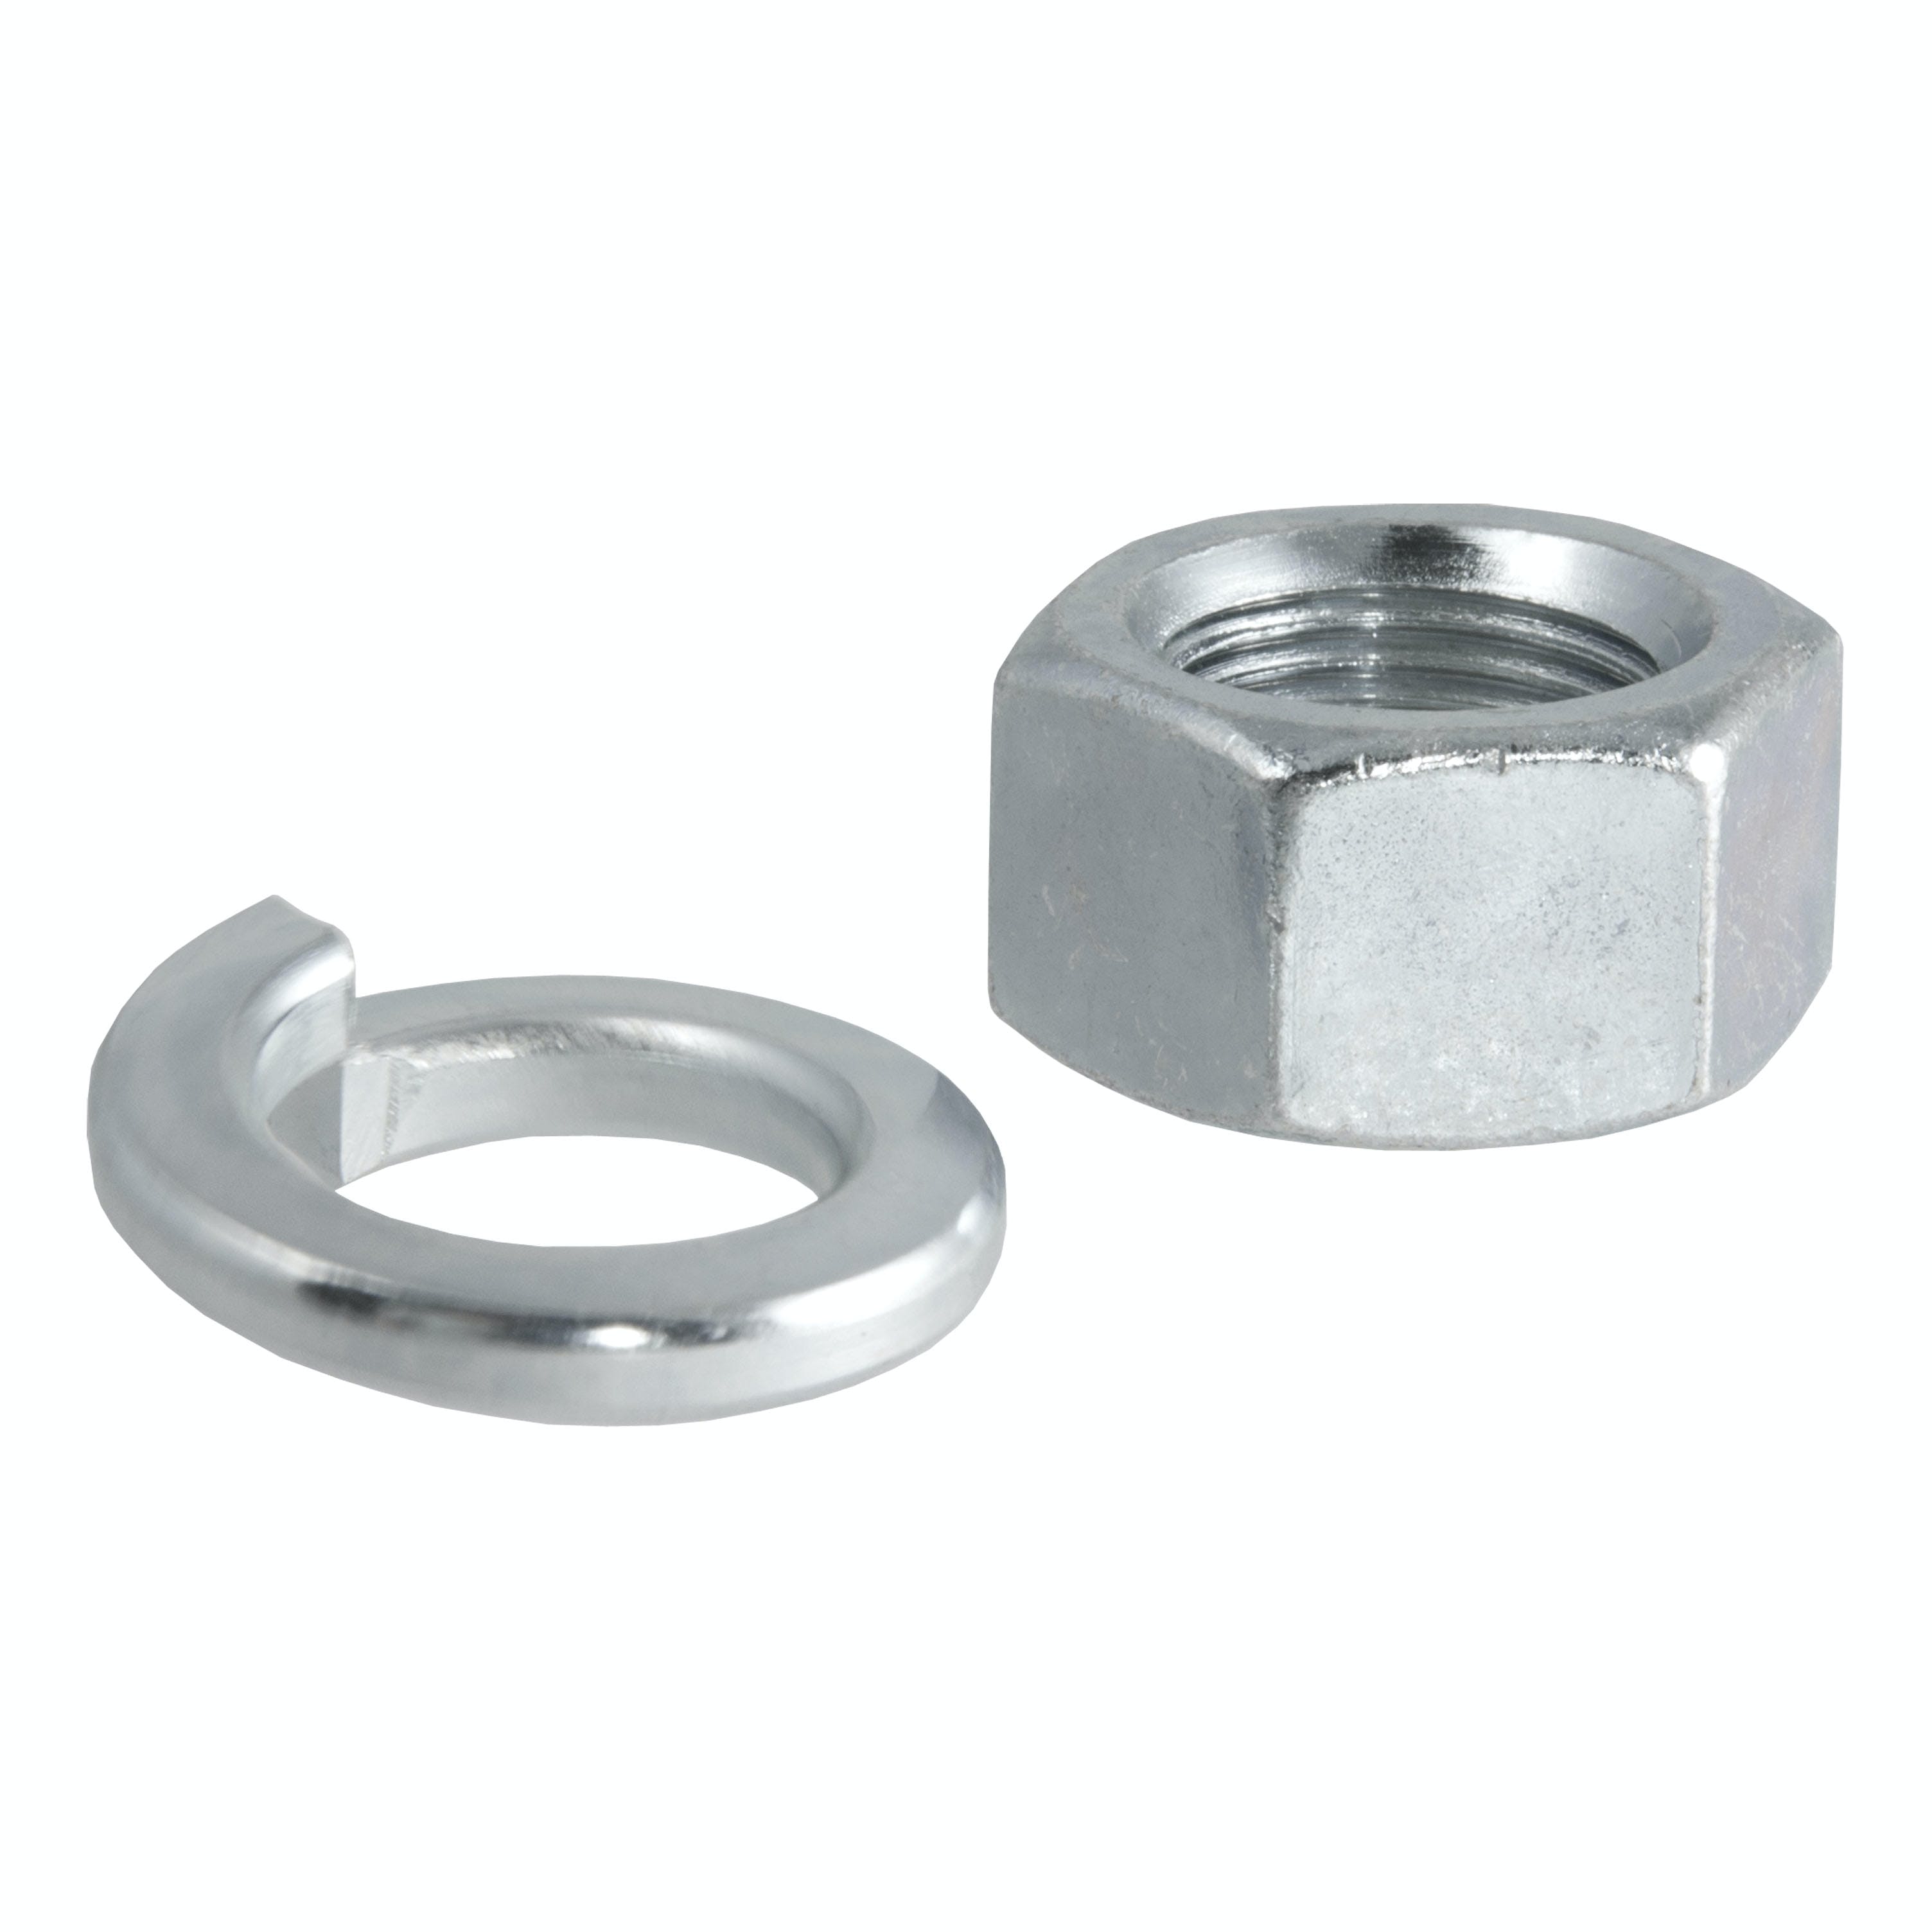 CURT 40103 Replacement Trailer Ball Nut and Washer for 3/4 Shank